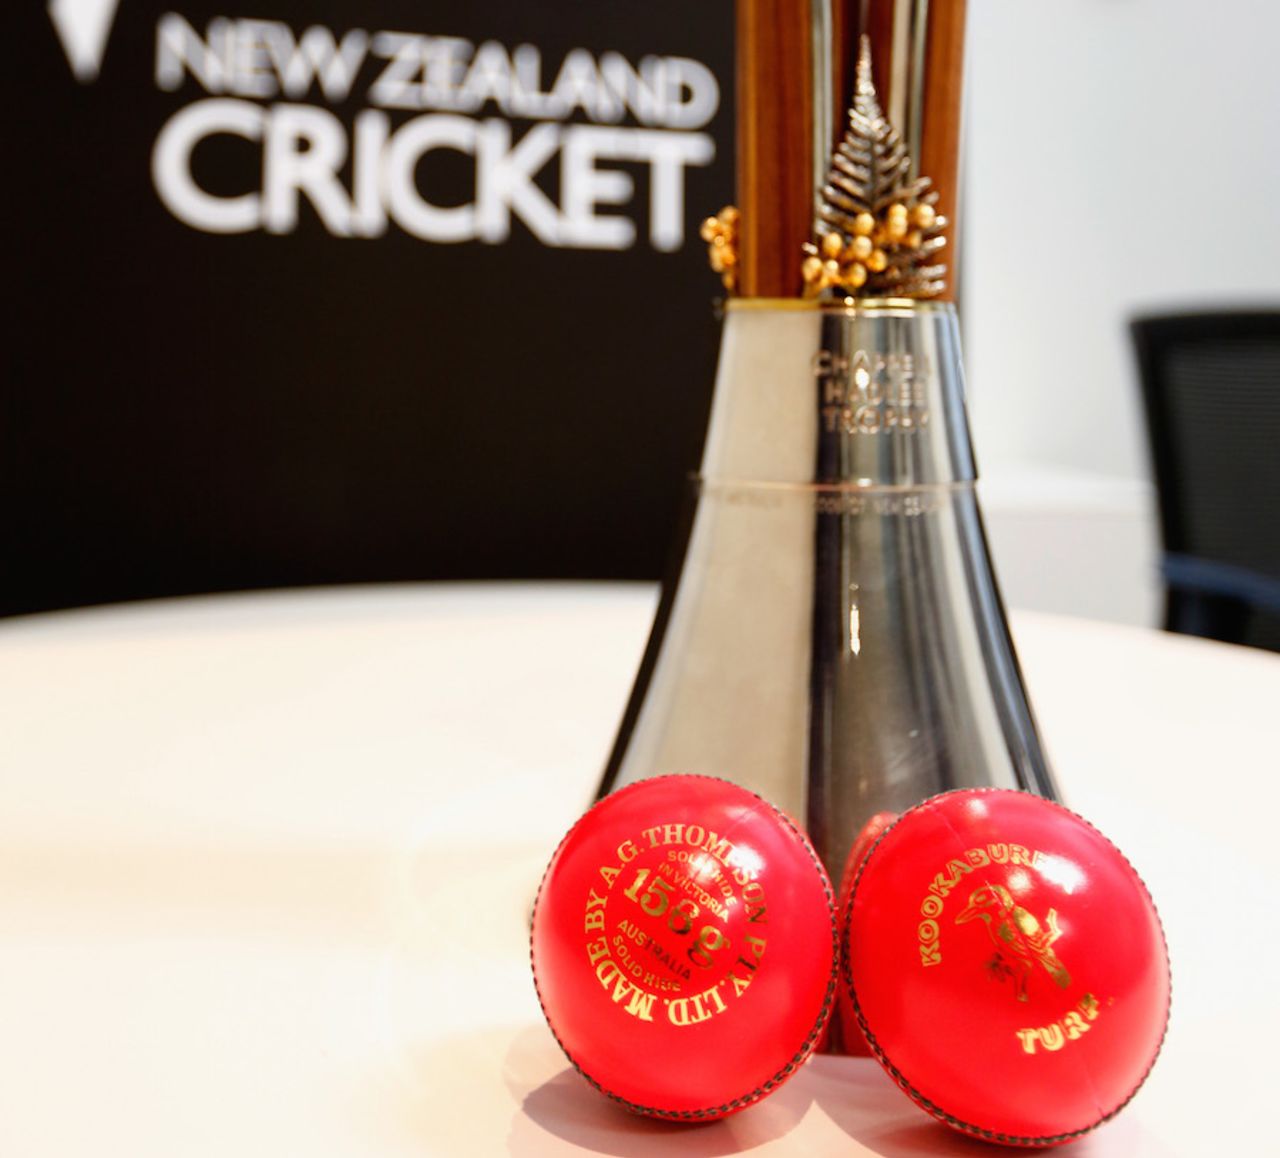 New Zealand Cricket unveils the new pink balls to be used in the Chappell-Hadlee Trophy, Auckland, June 30, 2015